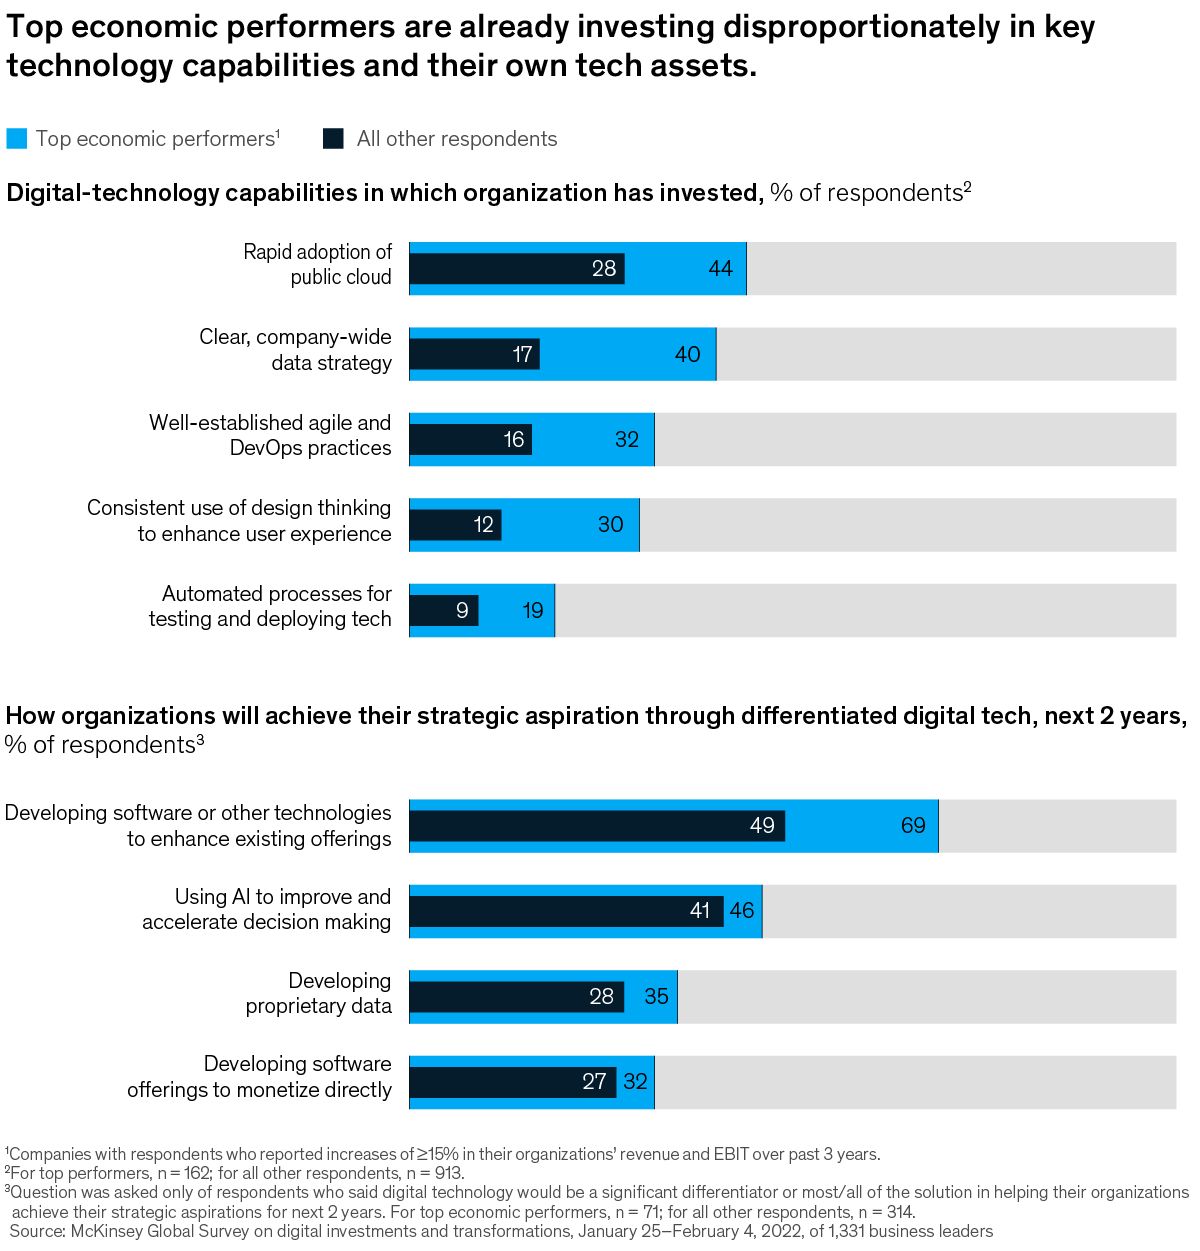 Chart detailing the top economic performers are investing disproportionately in key technology capabilities and their own tech assets